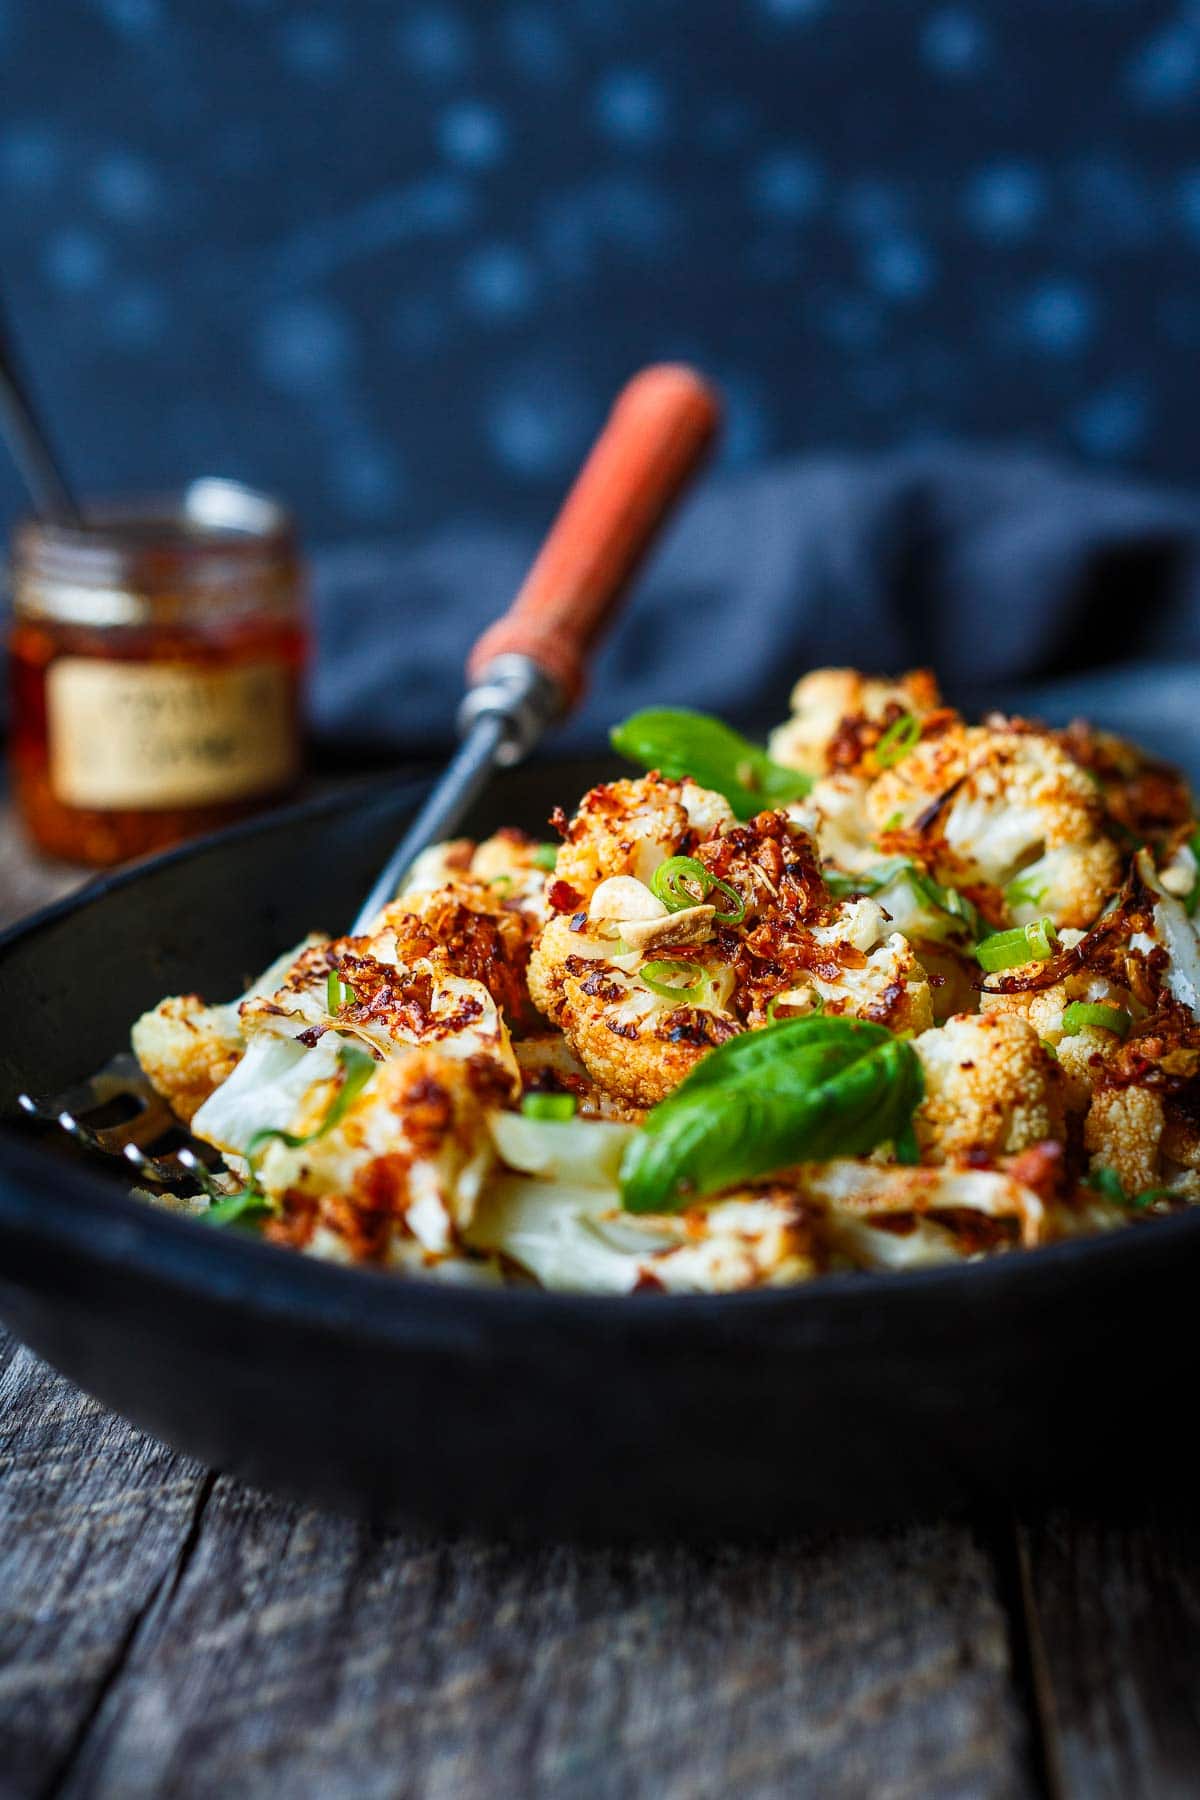 roasted chili crisp cauliflower in serving dish, garnished with basil leaves, scallions, crushed peanuts.